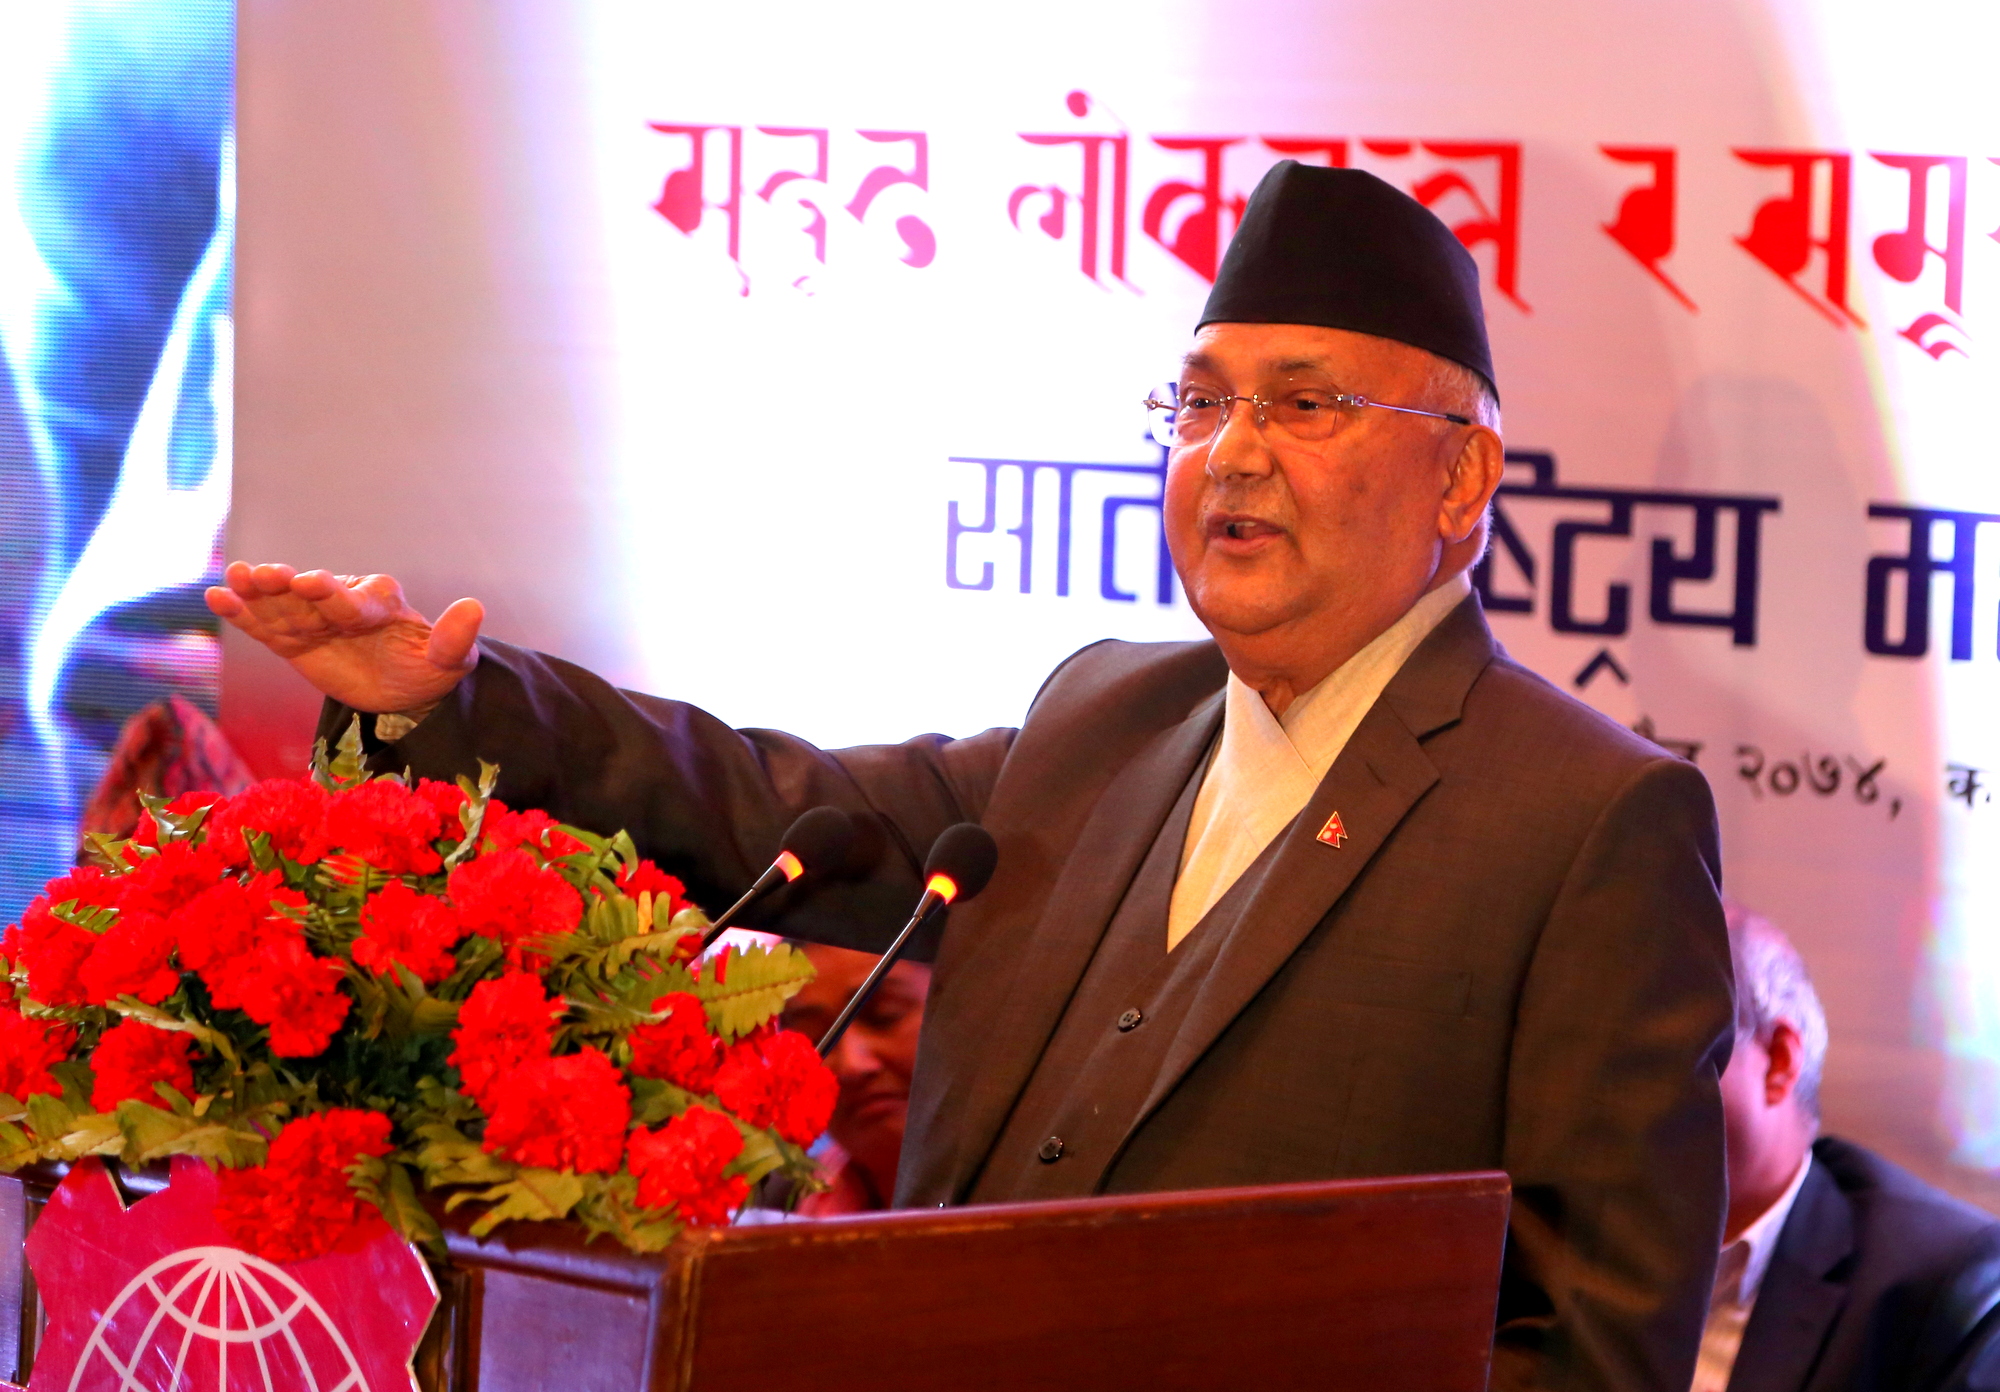 Monitoring, regulation must for good governance and transparency: PM Oli